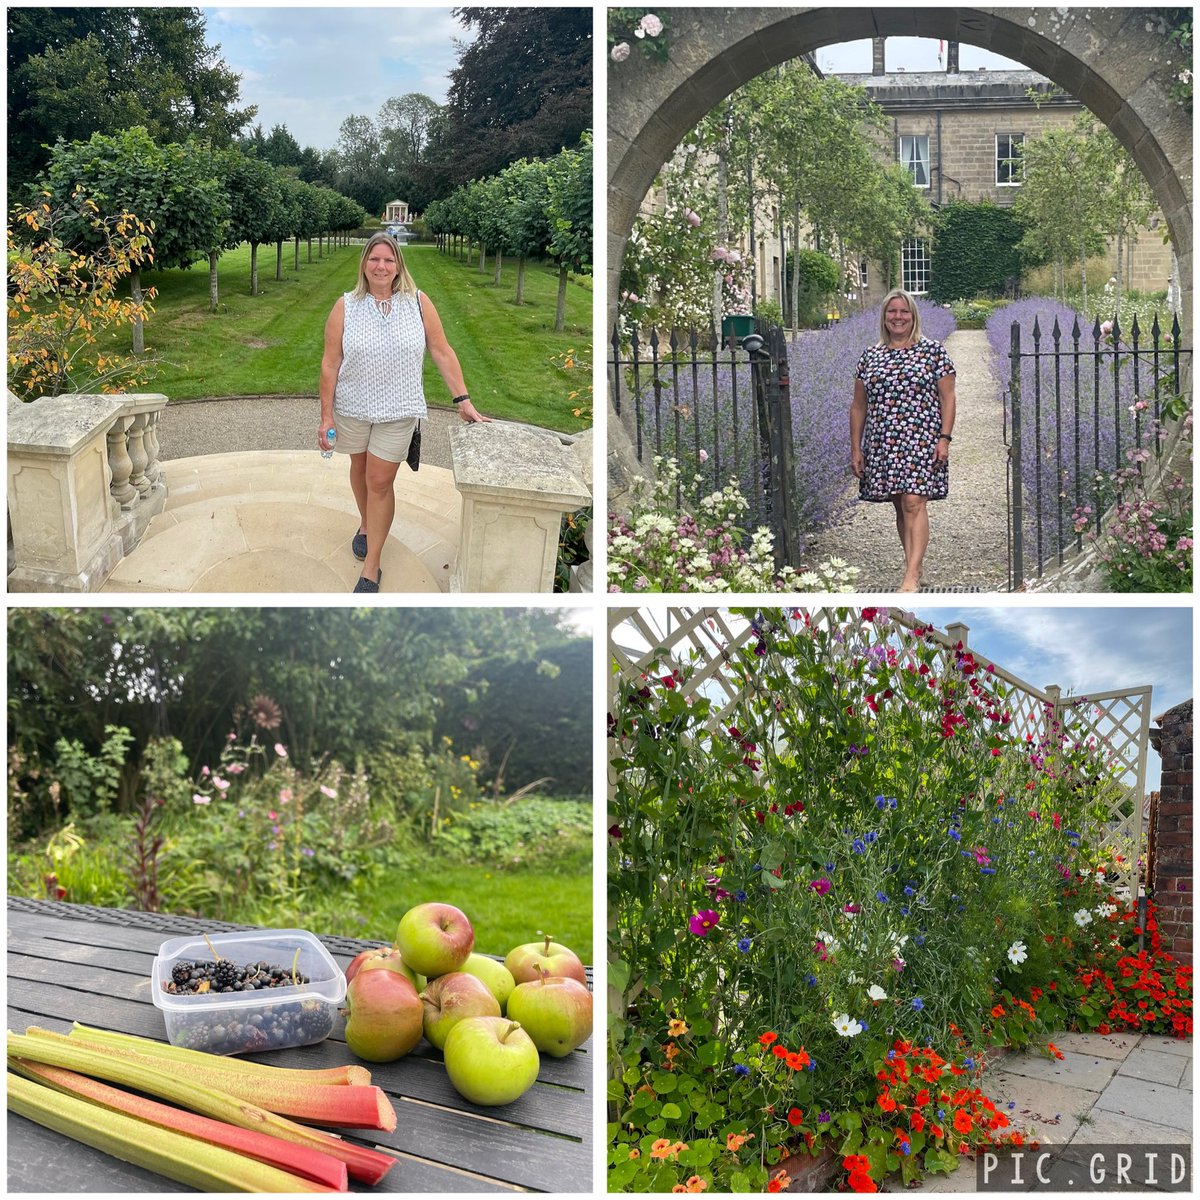 It’s #NationalGardeningDay and like many love to try a bit of gardening and am thankful to the garden owners @NGSyorkshire who share theirs for others to enjoy too supporting many charities inc @TheQNI 🌷 🌺 🌳🙏 @CrystalOldman @DrAmandaYoung @NGSOpenGardens @johnunsworth10